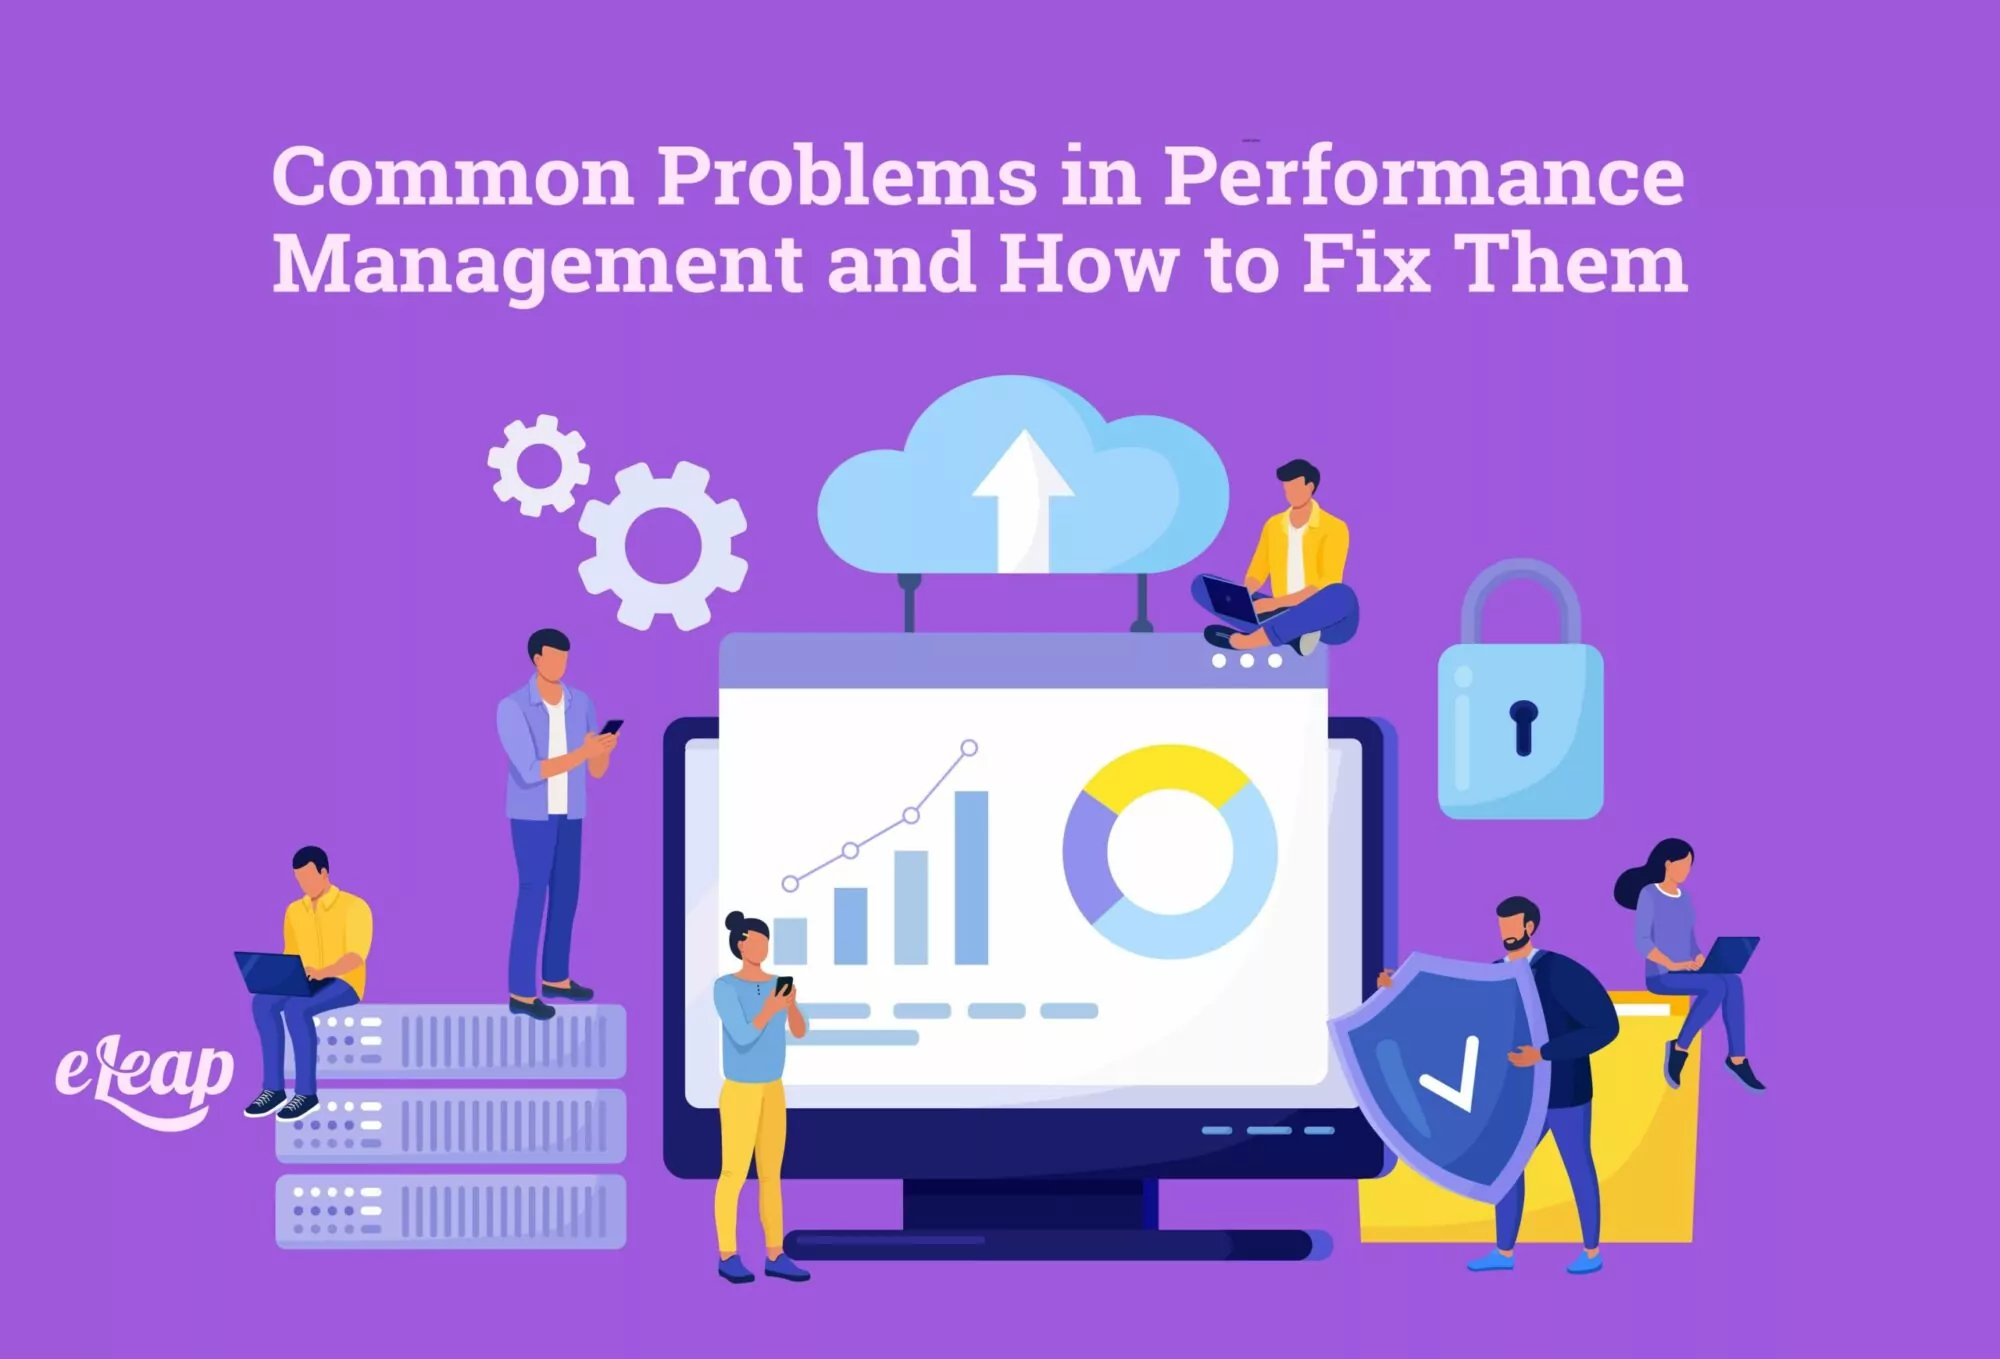 Common Problems in Performance Management and How to Fix Them